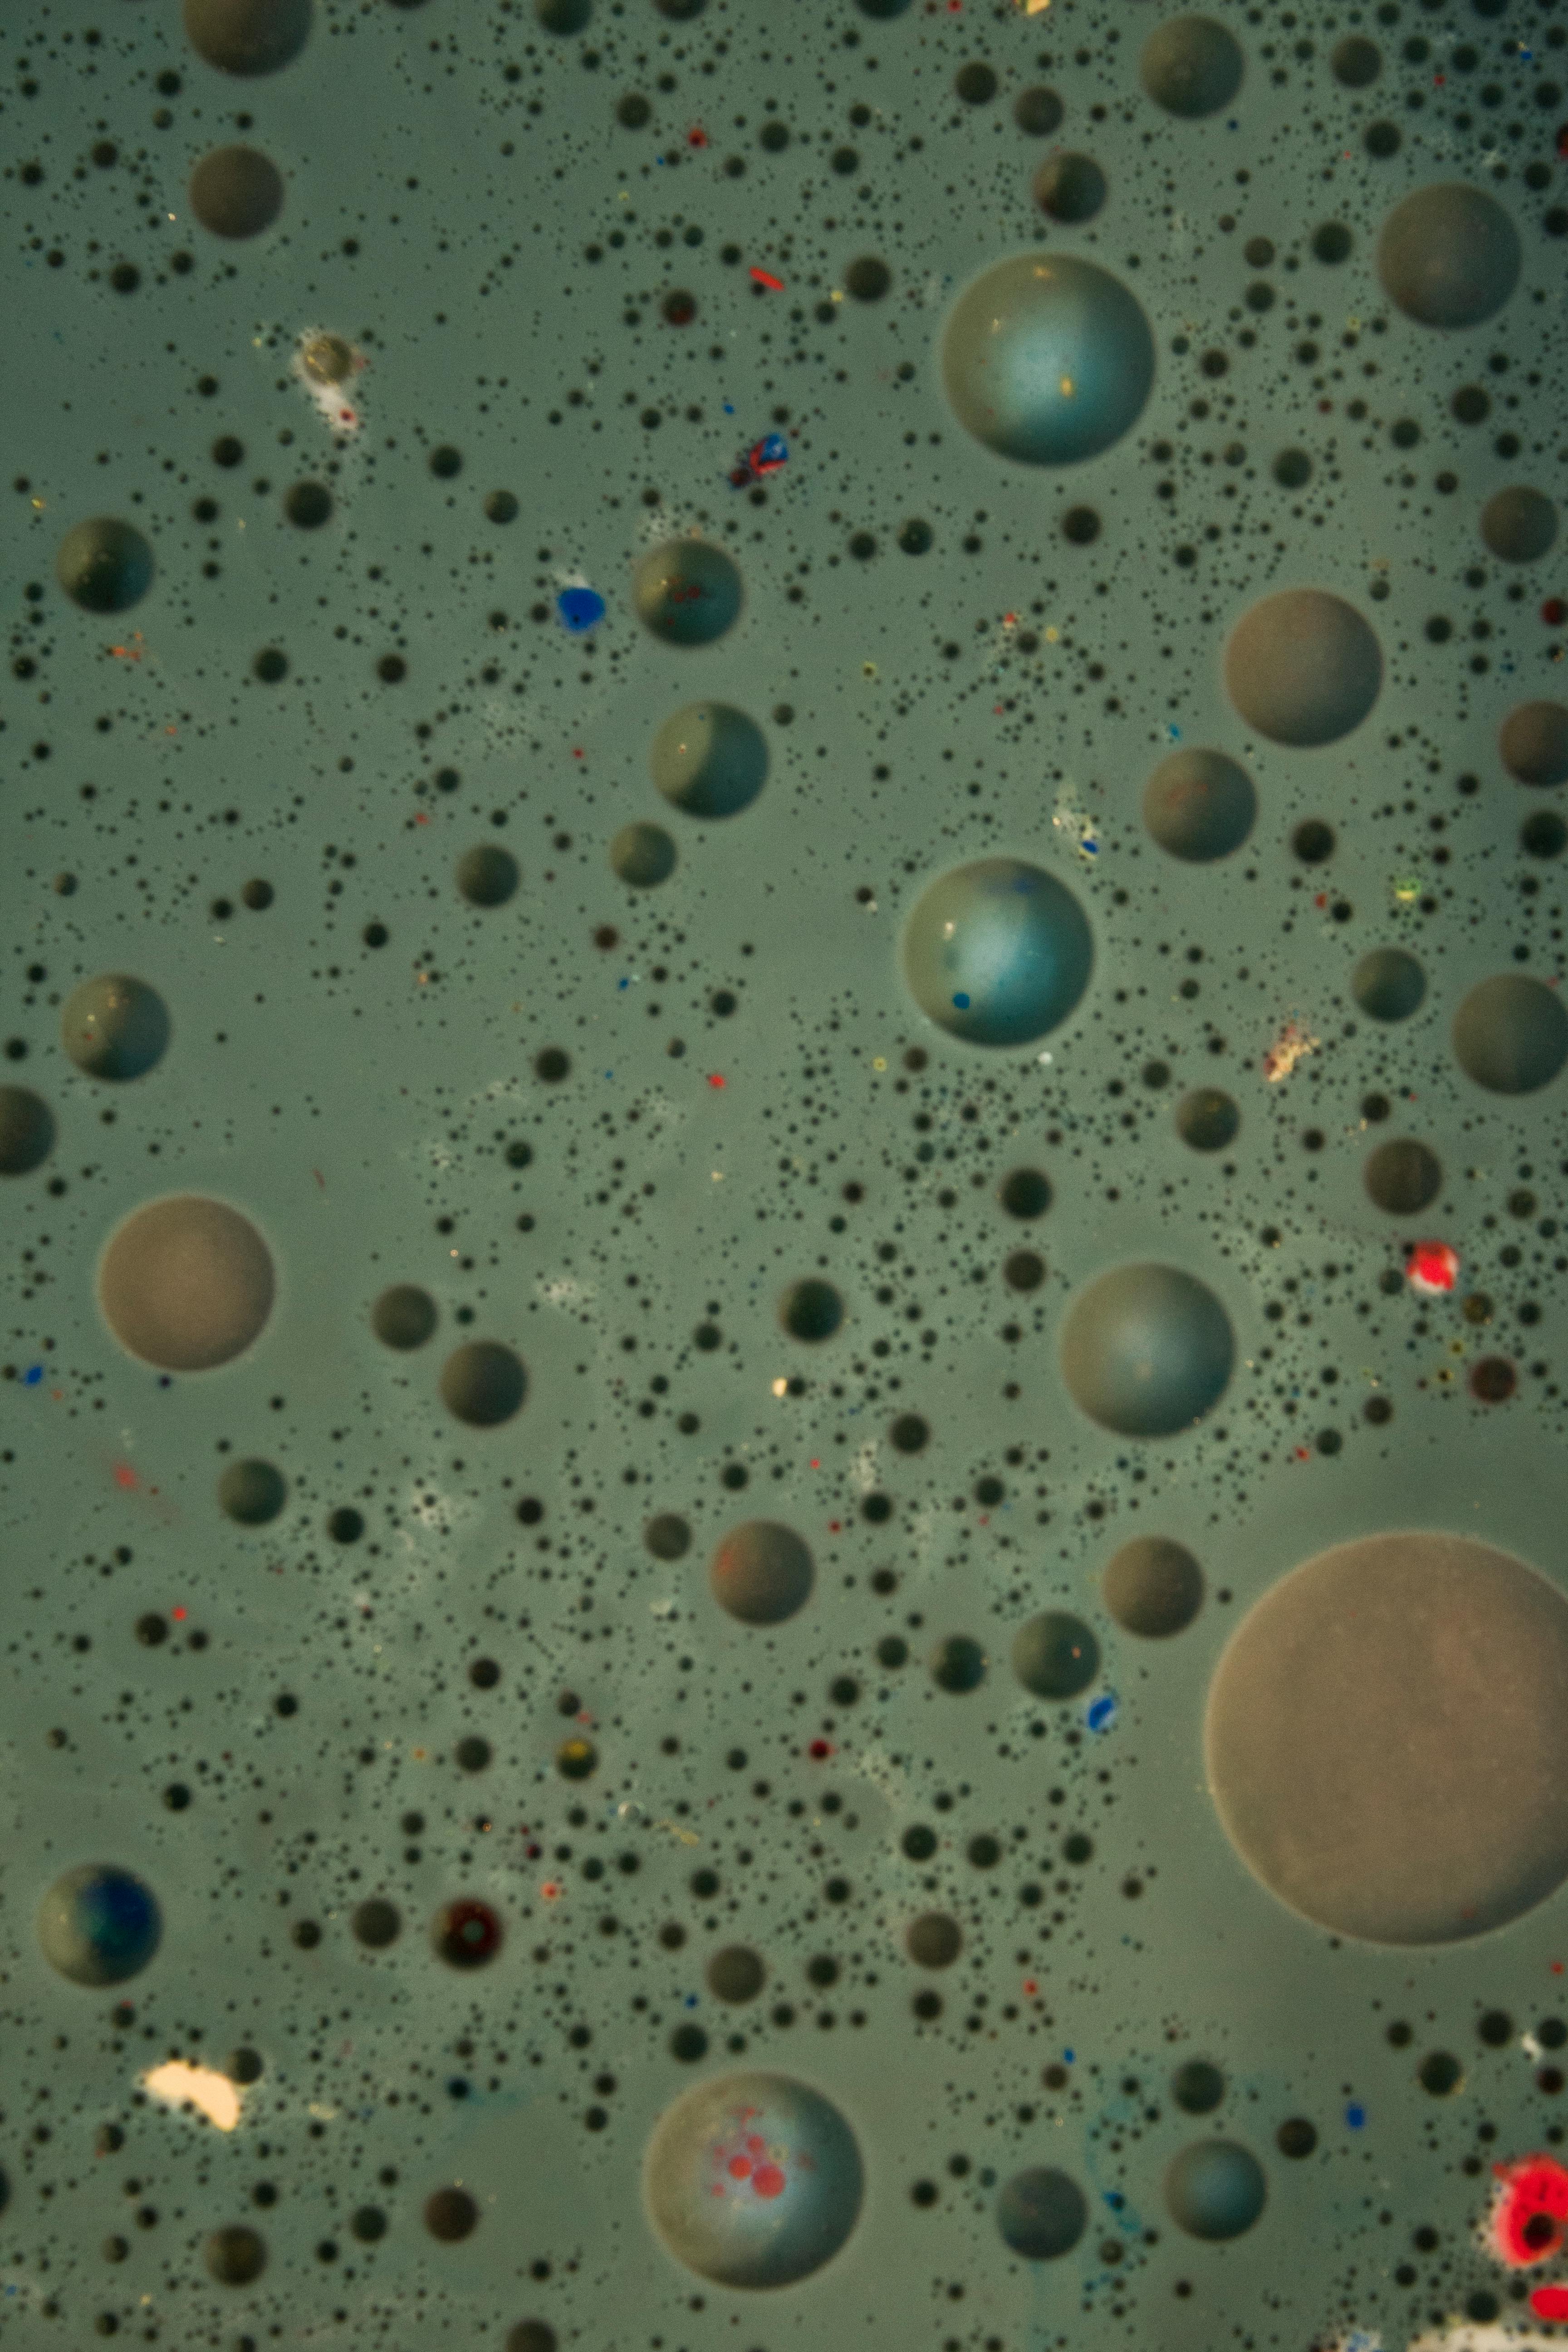 Free stock photo of #bubbles #paint #planets #galaxy